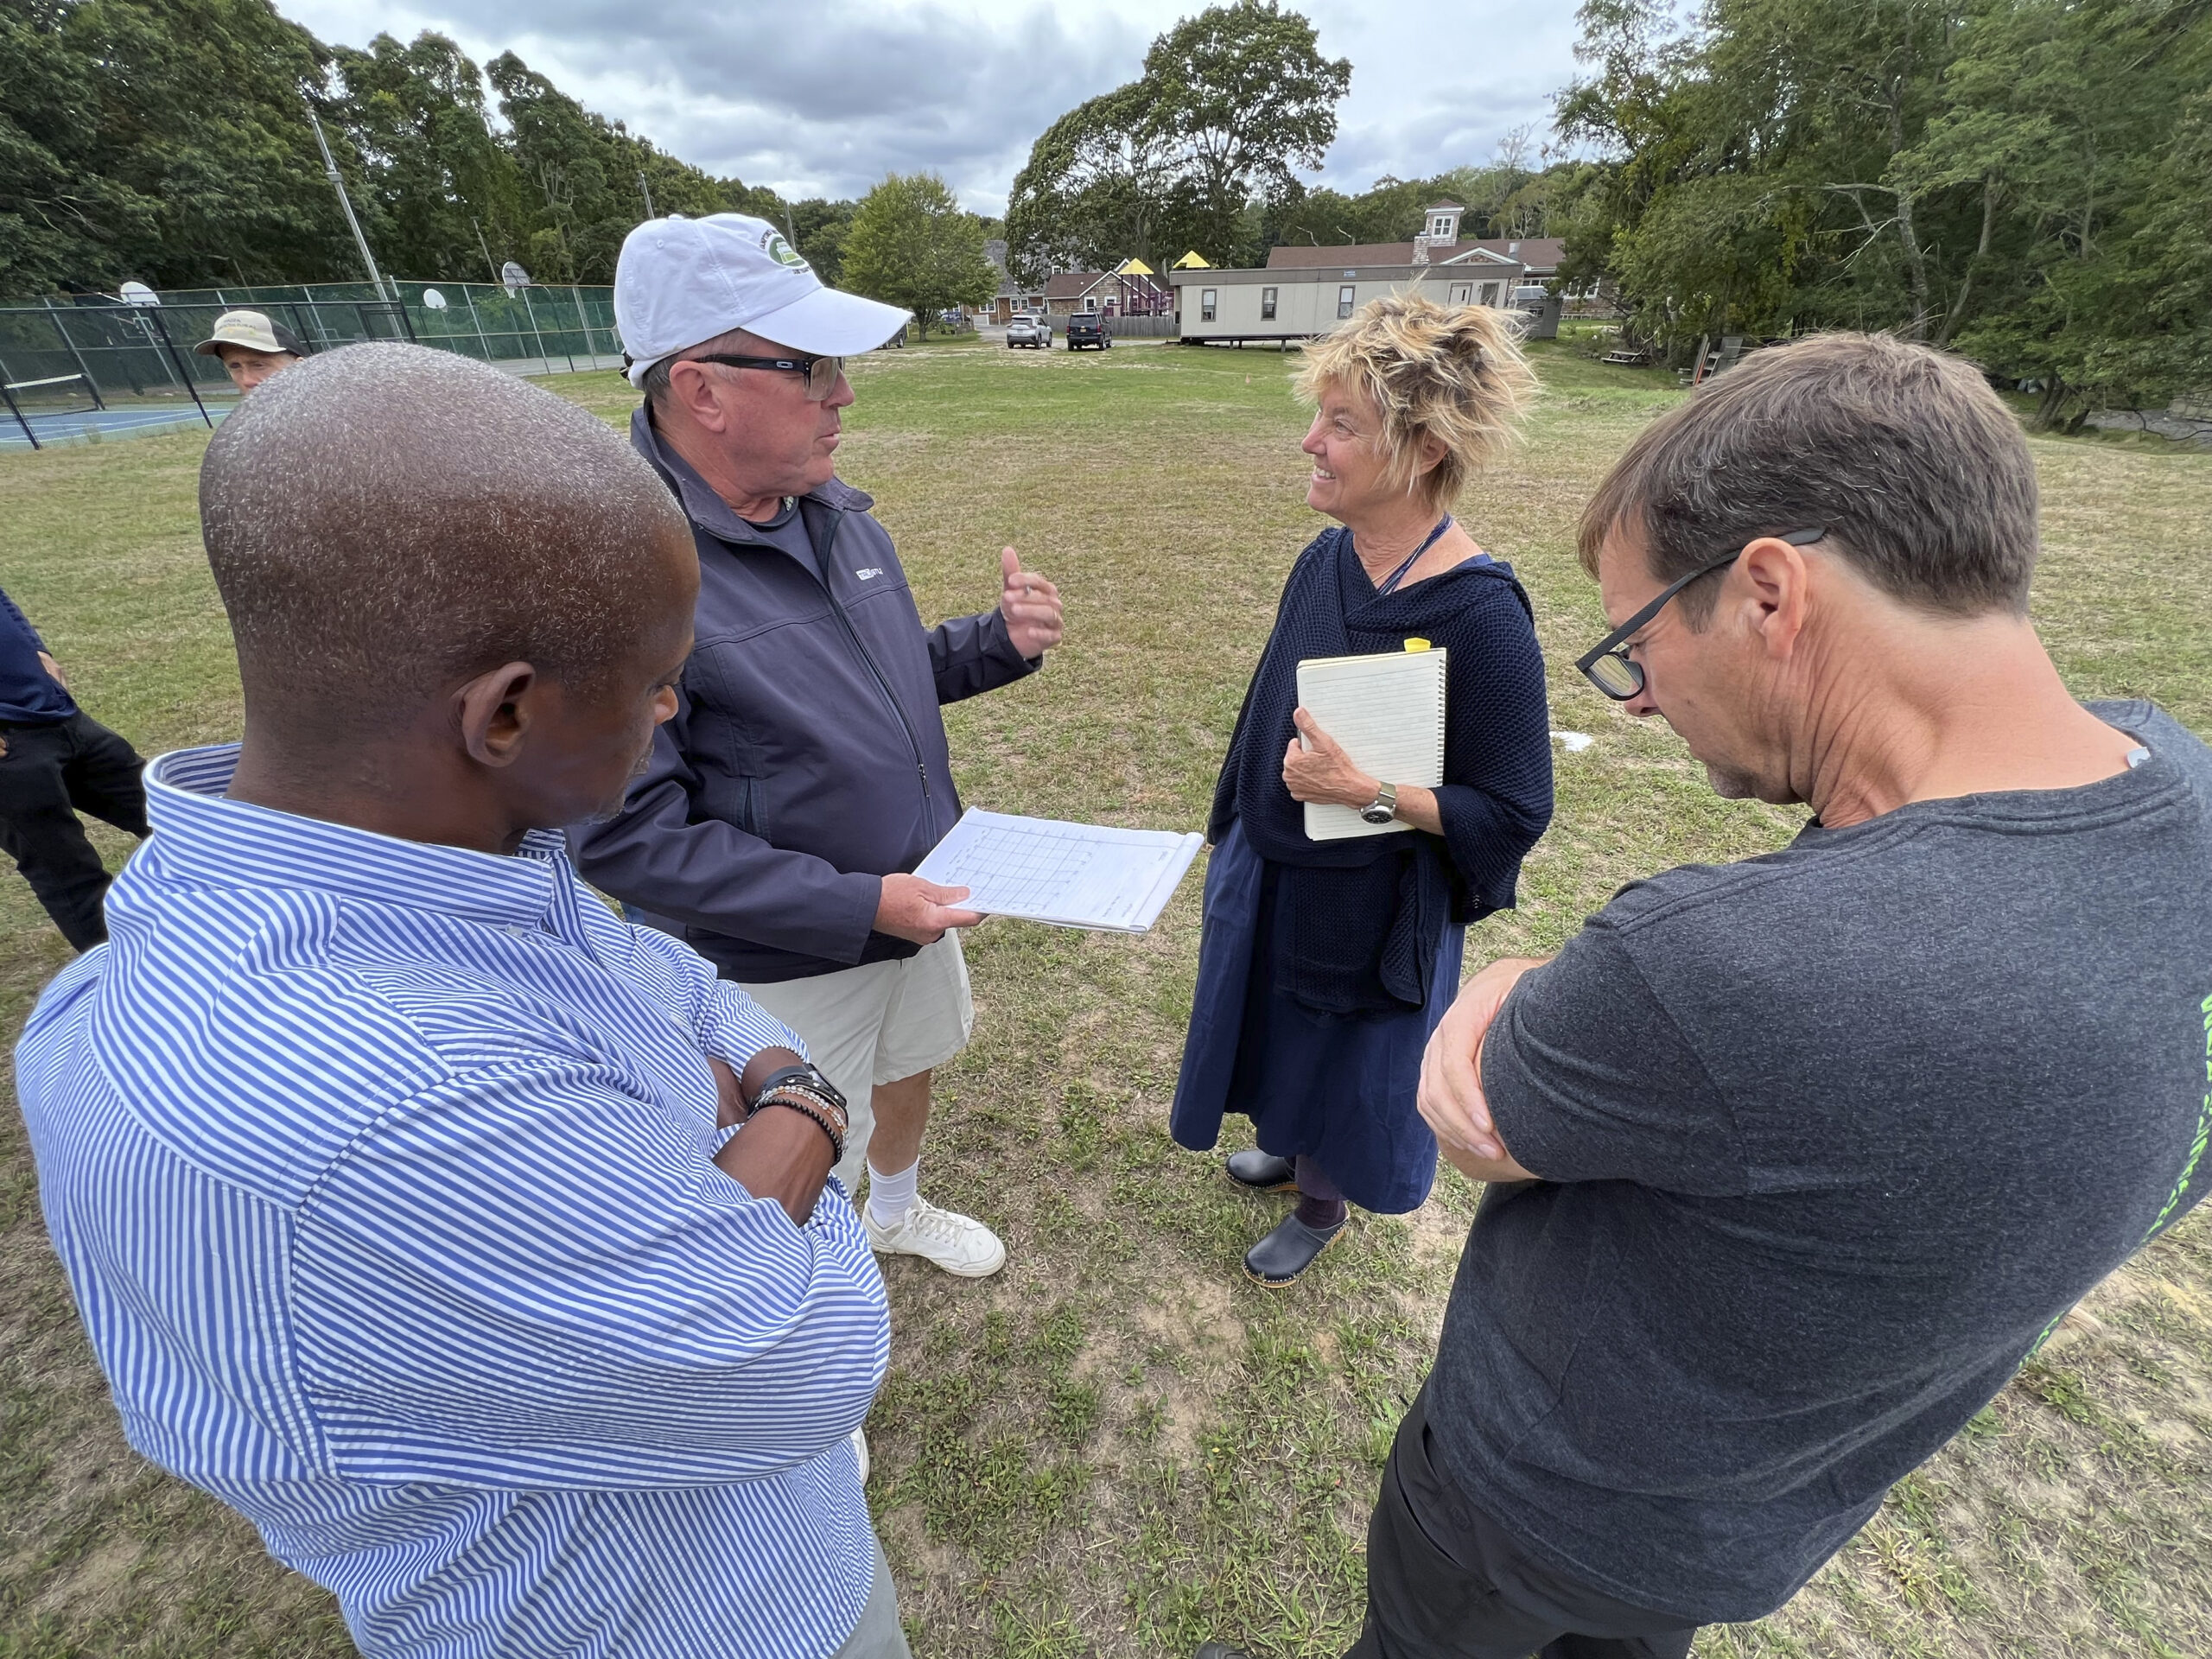 Carl Johnson, Douglas DeGroot, Edwina von Gal and Paul Wagner discuss plans for the Bridgehampton Child Care and Recreational Center field on Friday.  DANA SHAW